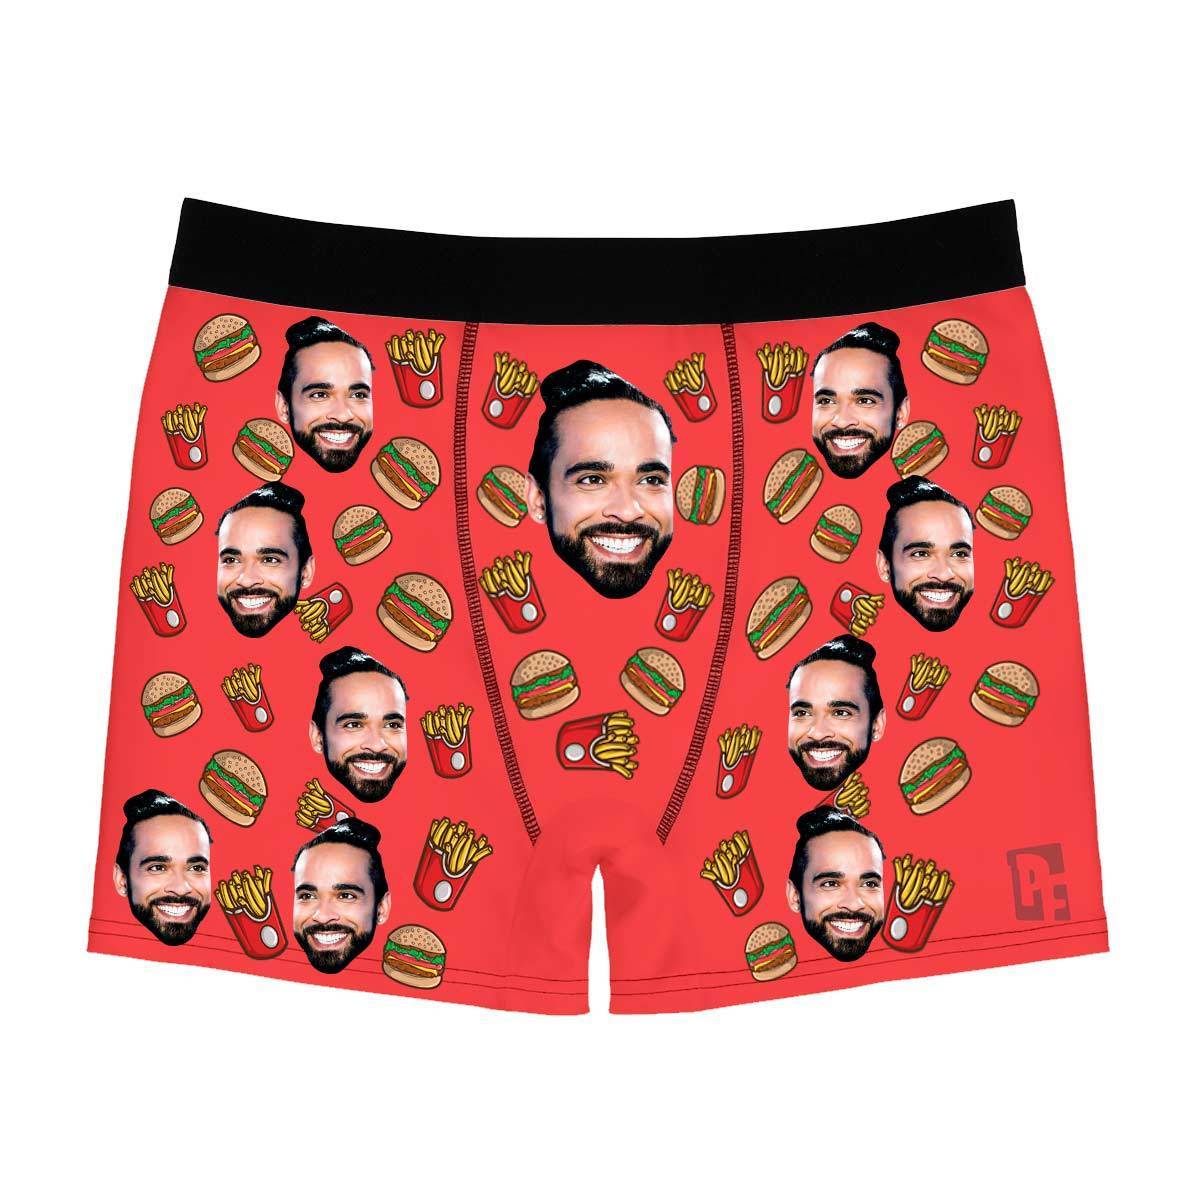 Red Fastfood men's boxer briefs personalized with photo printed on them